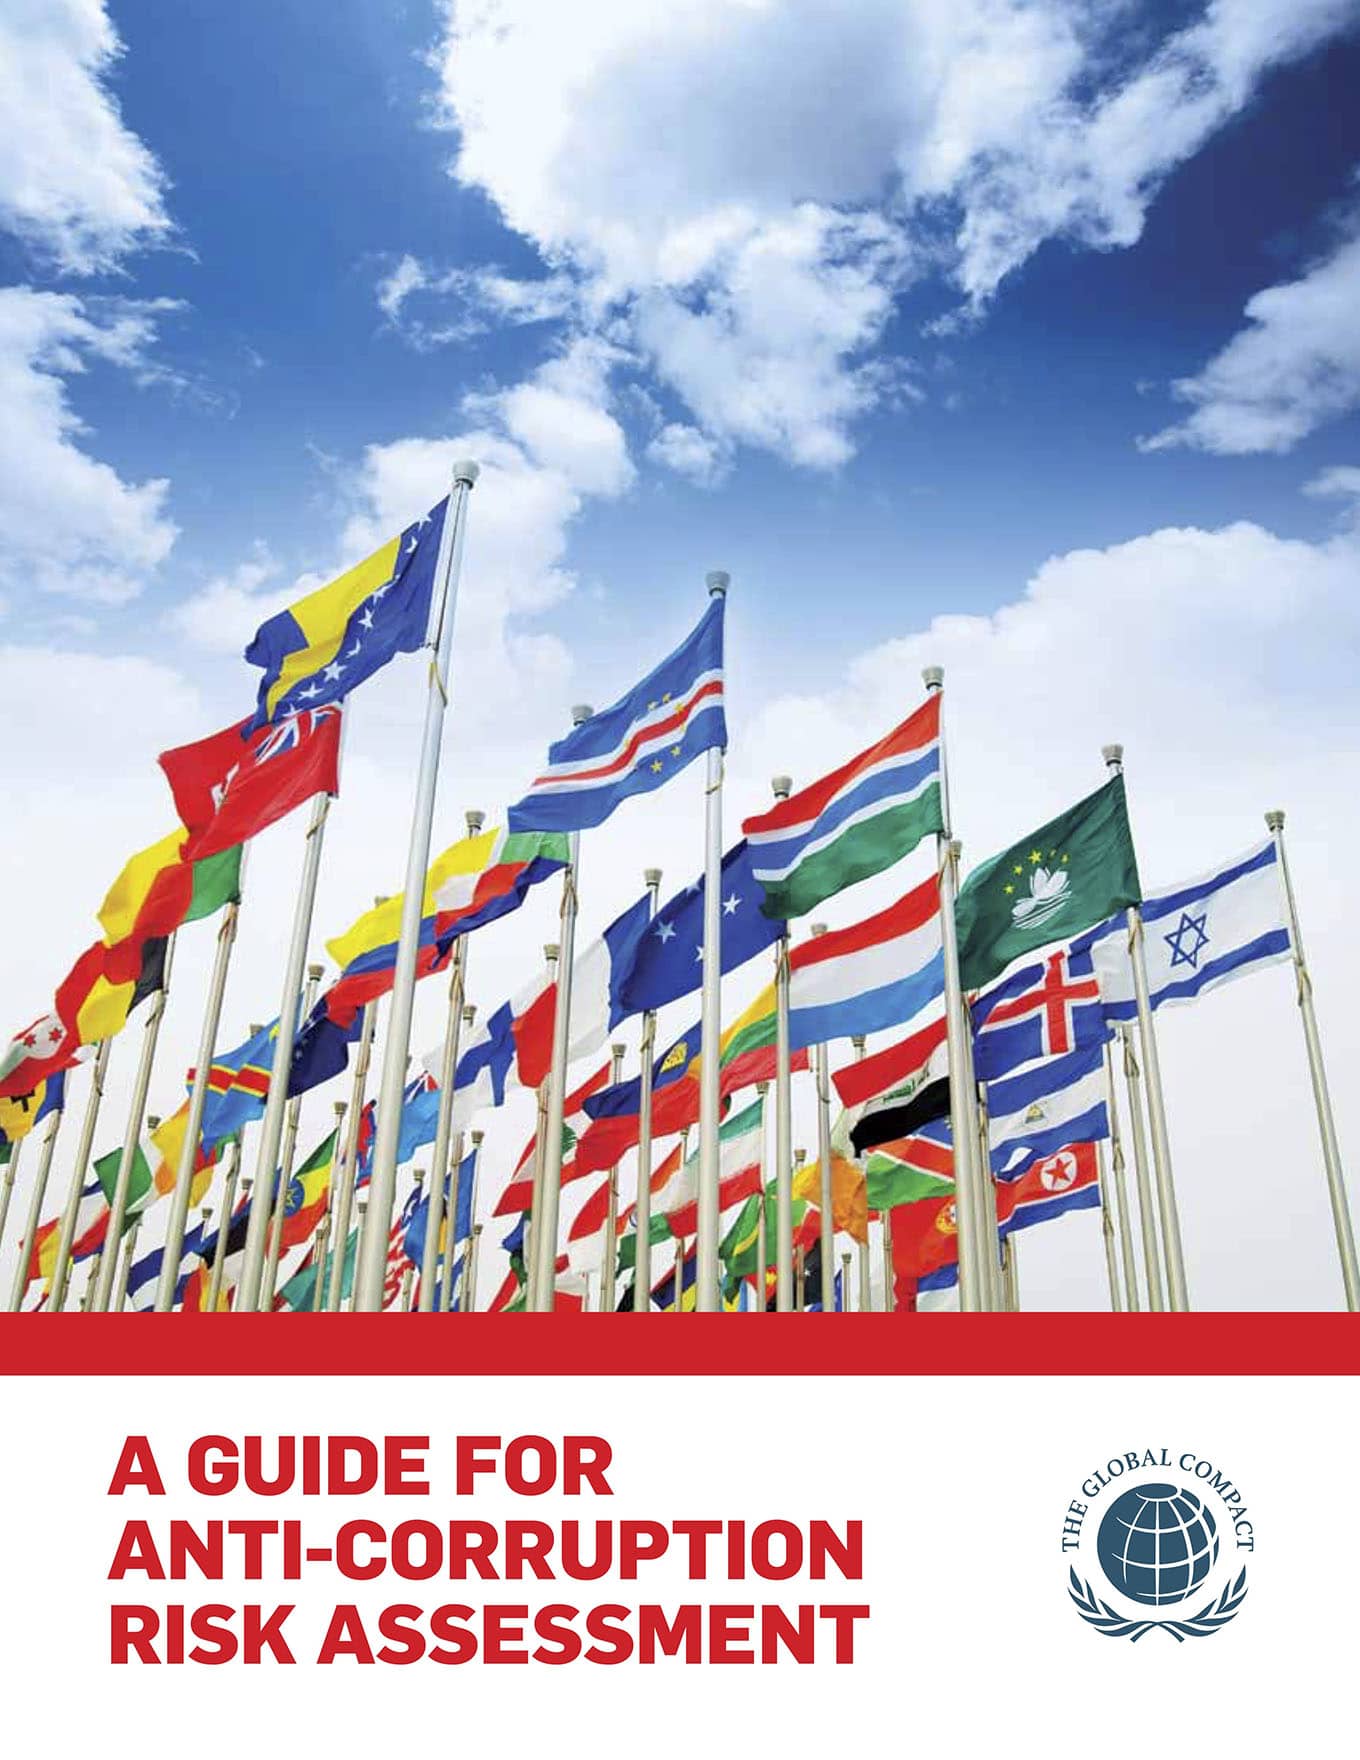 A Guide for Anti-Corruption Risk Assessment (Global Compact, 2013)